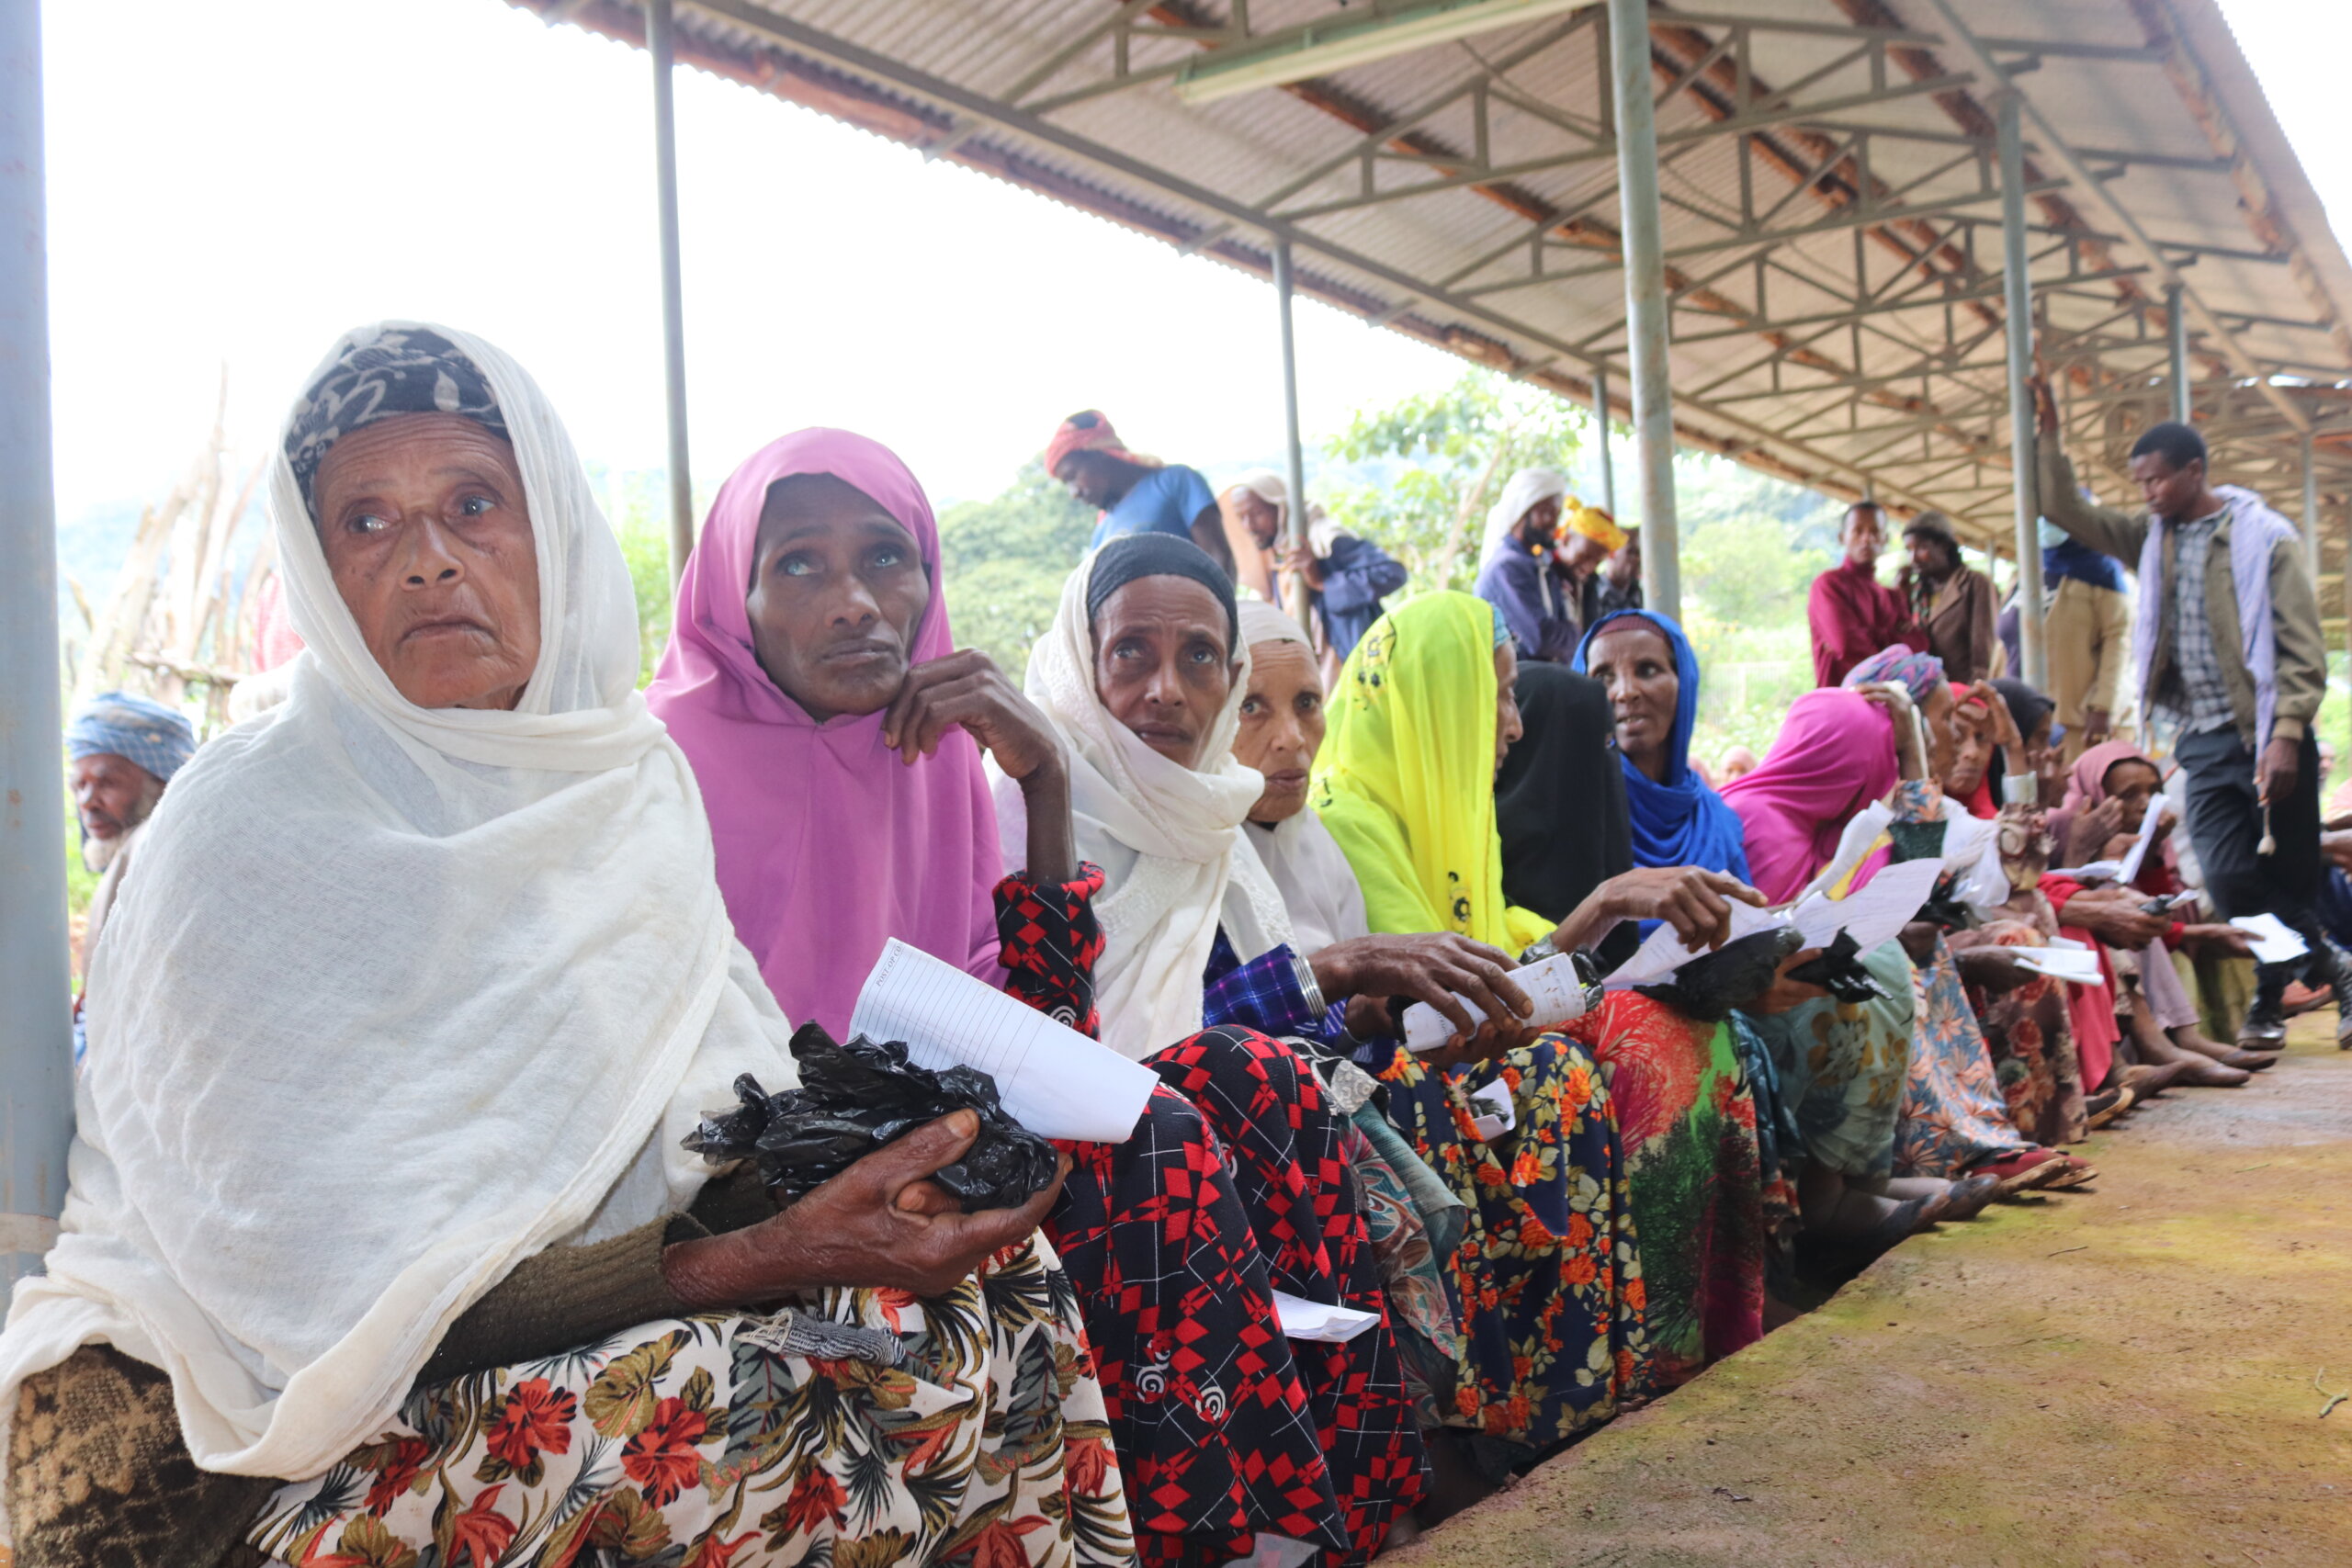 Women in brightly coloured shawls and skirts sit in a queue for eye care in an outdoor waiting area in Ethiopia.